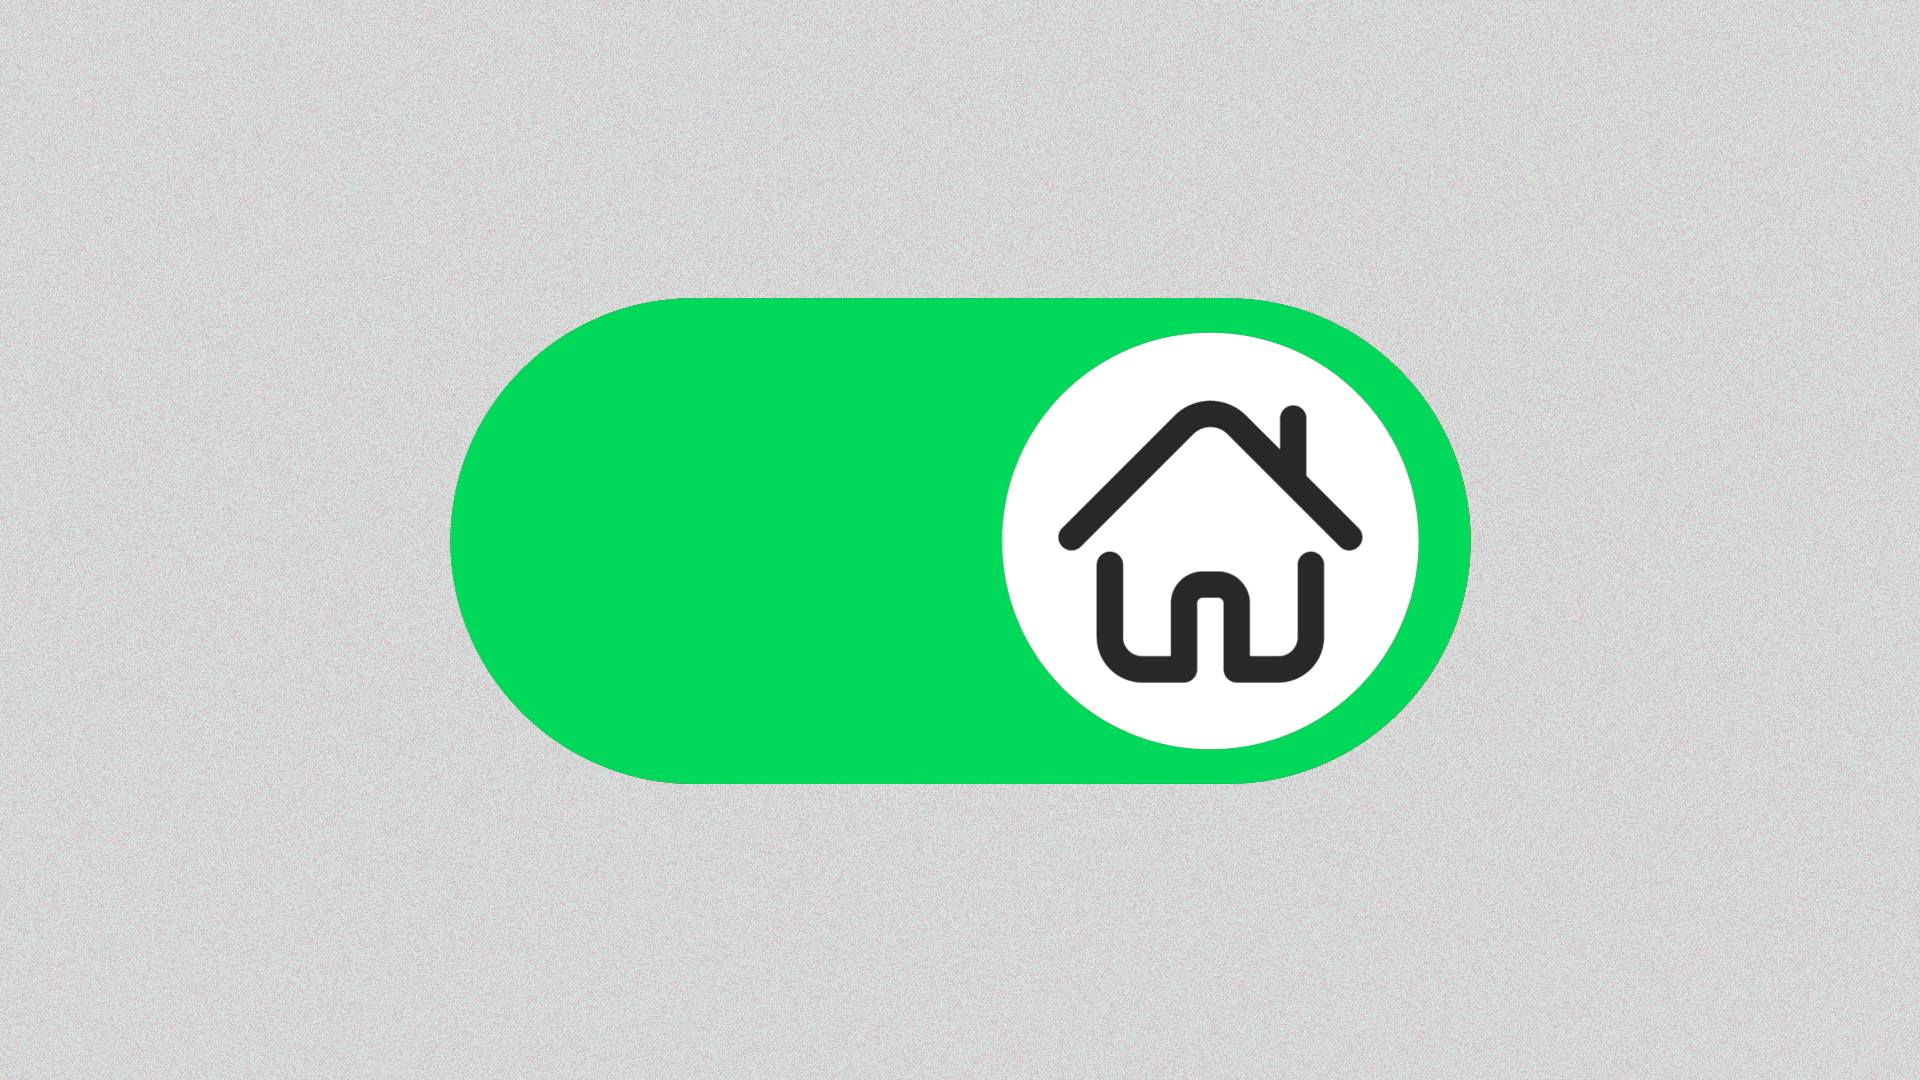 Illustration of a switch with a house icon, shifting from on to off.